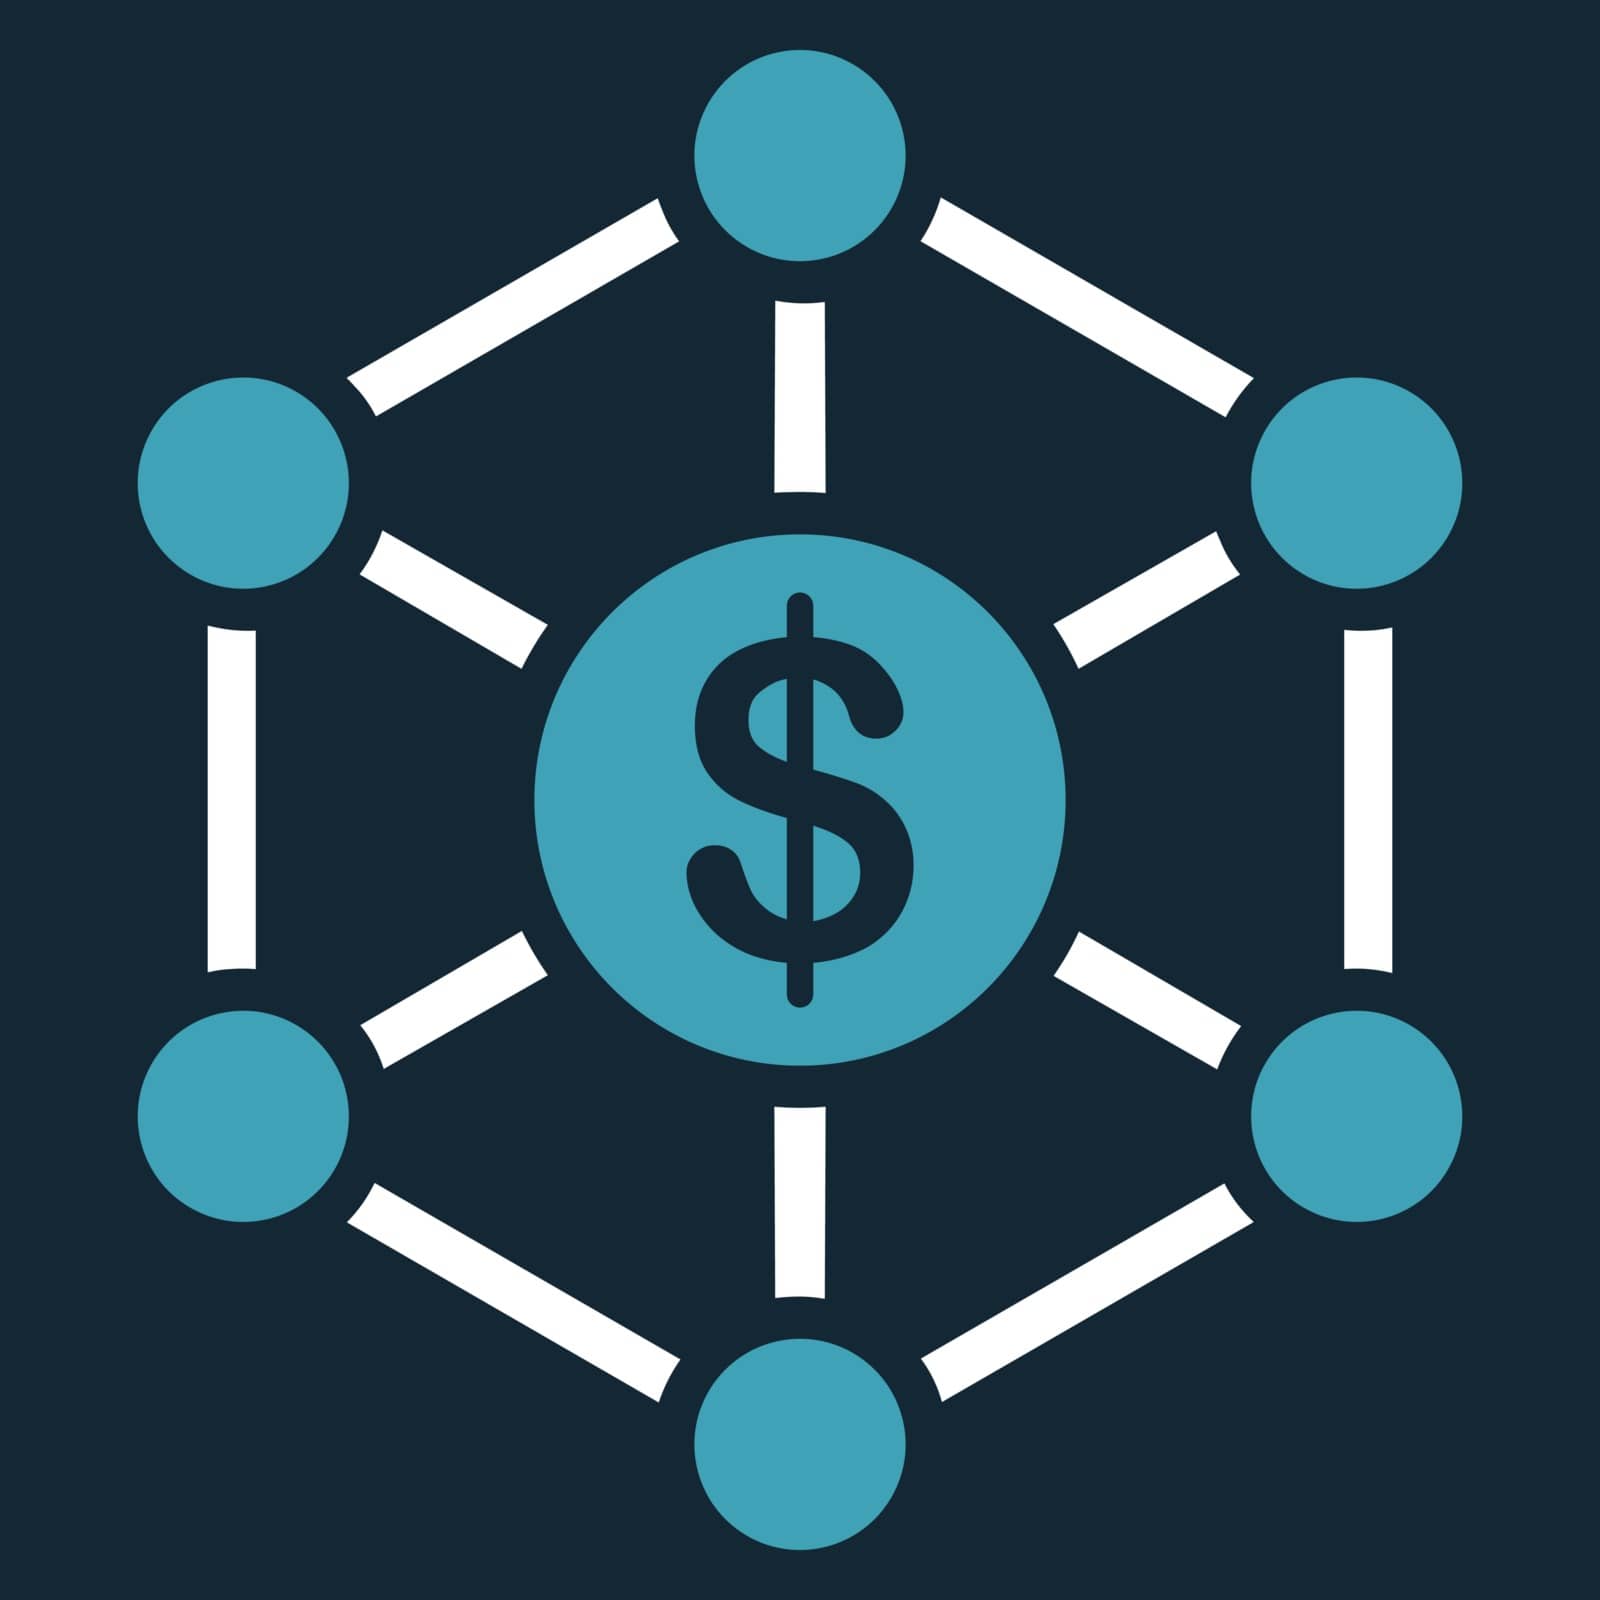 Scheme icon from Business Bicolor Set. This flat vector symbol uses blue and white colors, rounded angles, and isolated on a dark blue background.